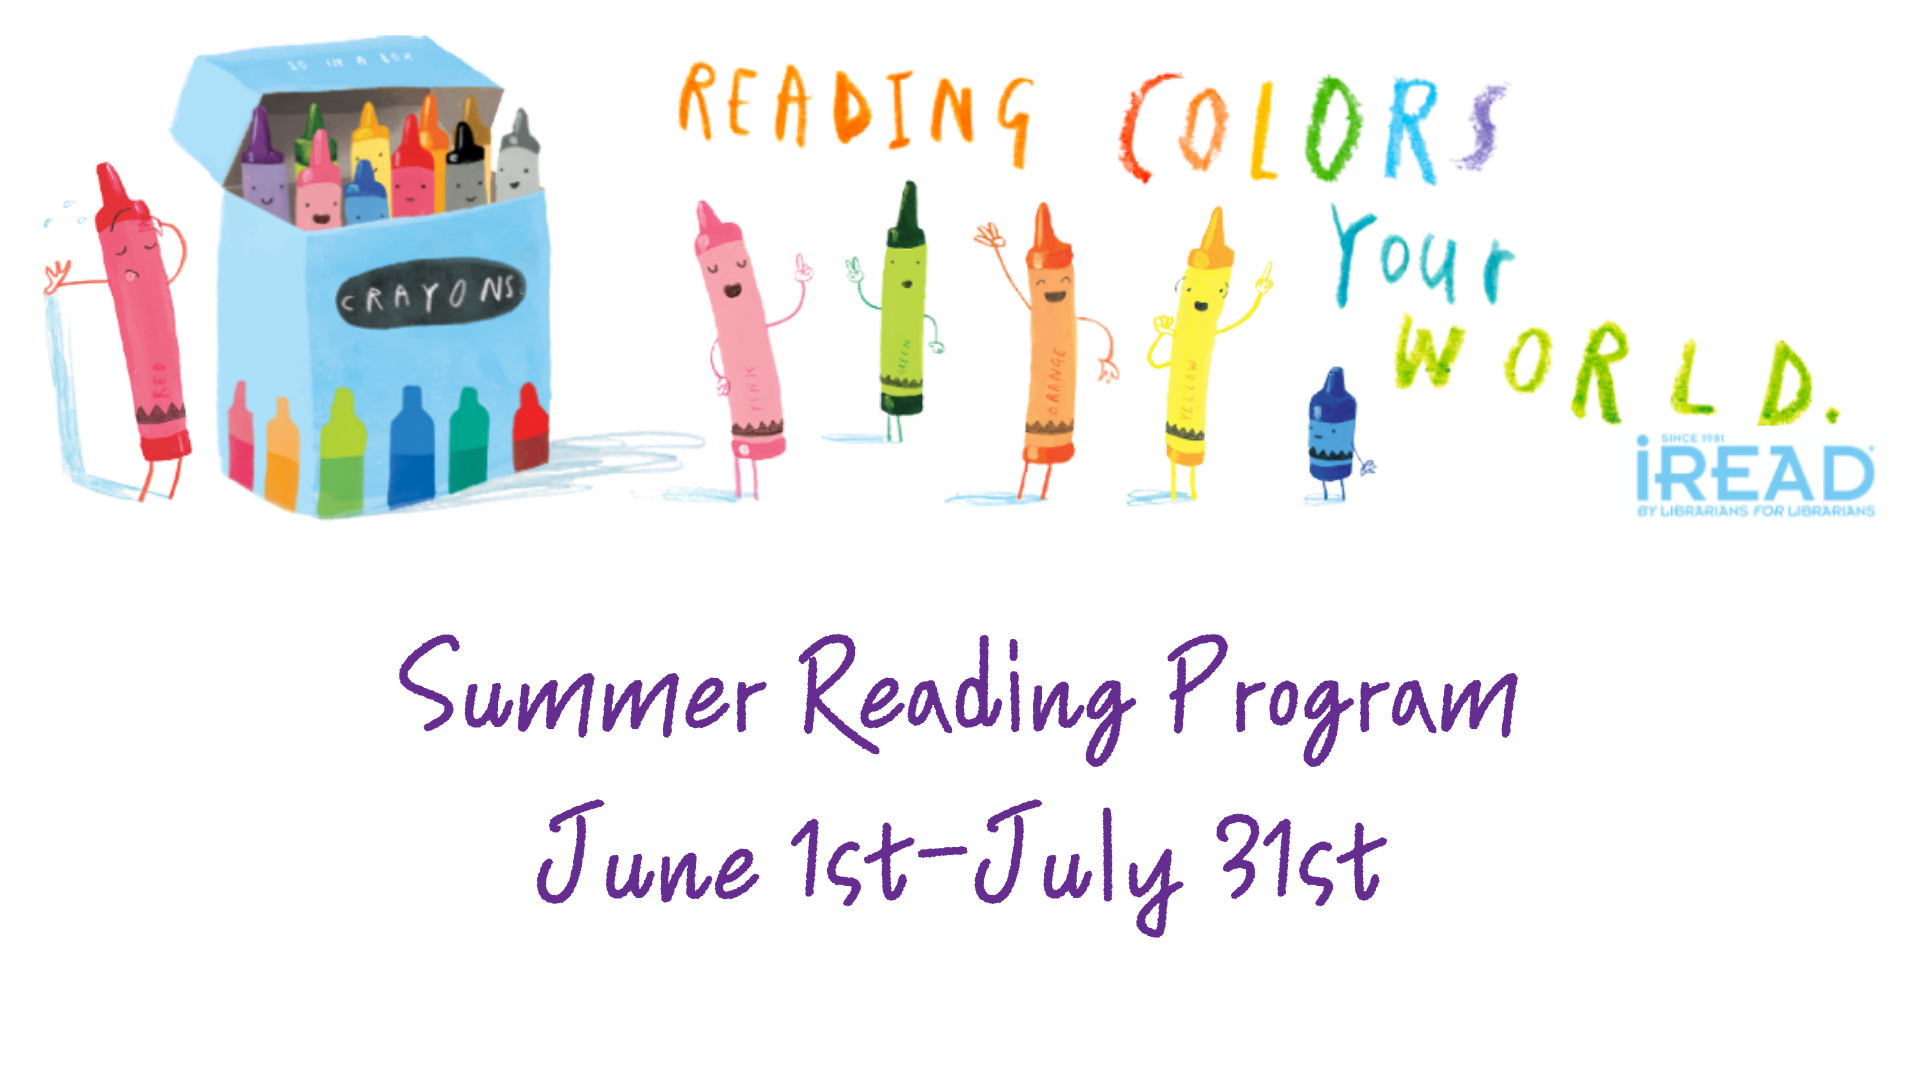 Summer Reading Program Reading Colors Your World Hoopla